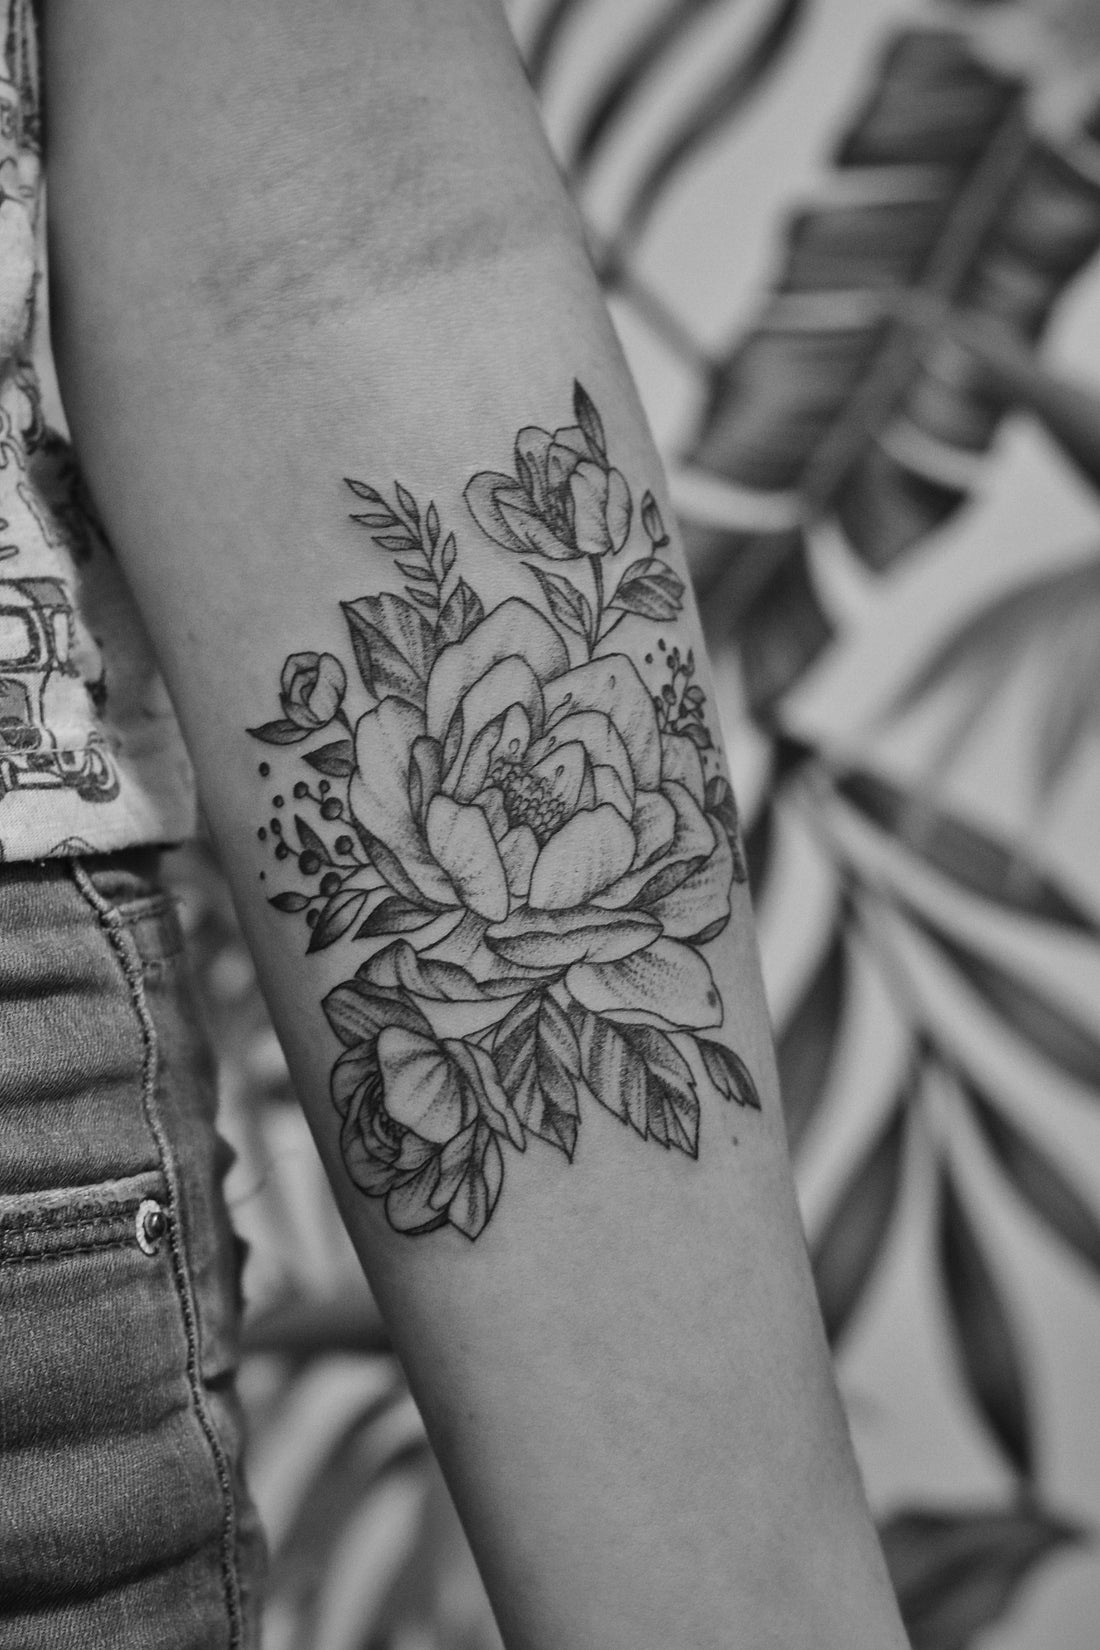 How to Apply Temporary Tattoos Like a Pro